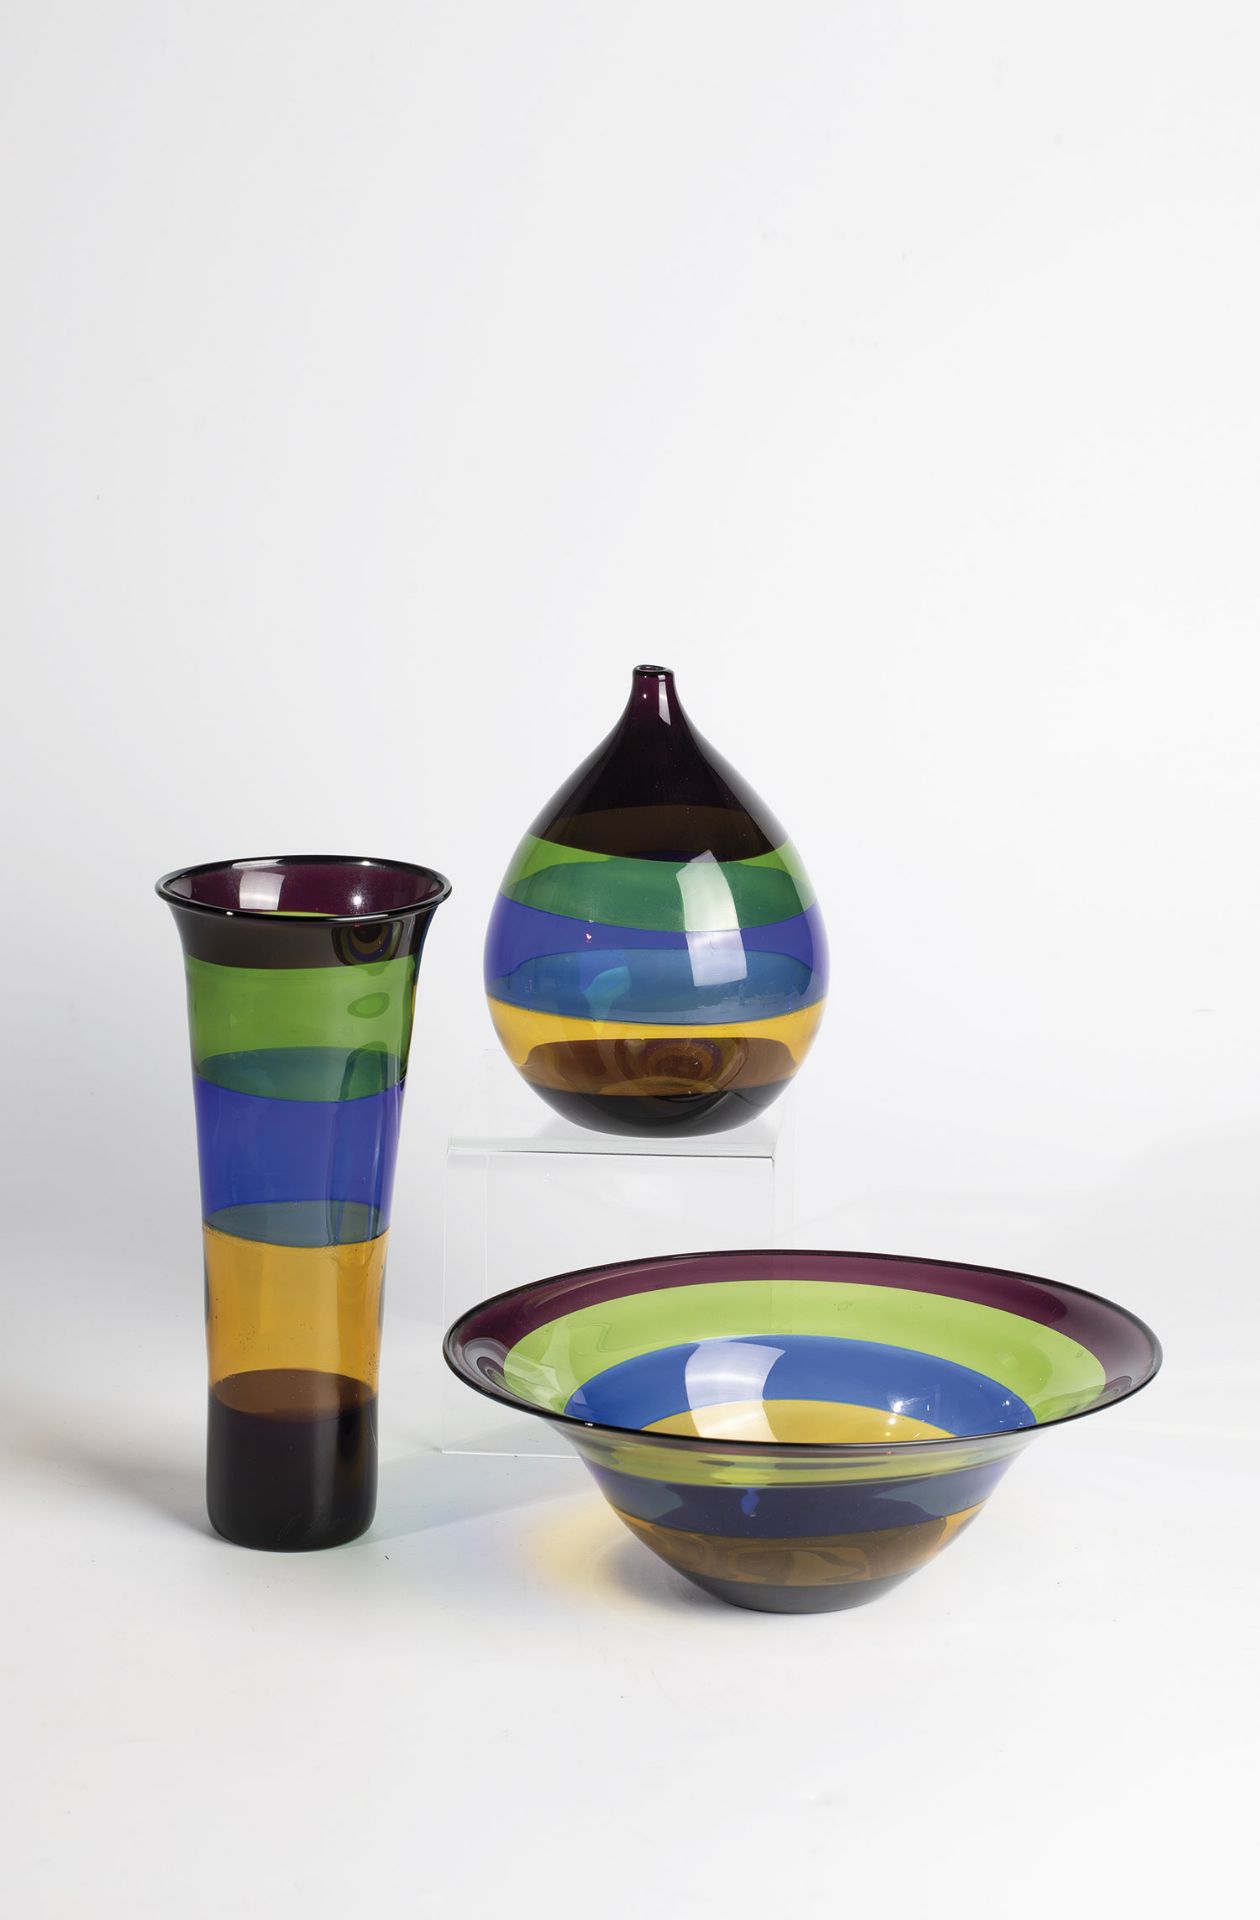 Two vases and a bowl Reinhard Herzog, 1980s Blown in front of the lamp, blue, yellow, green and